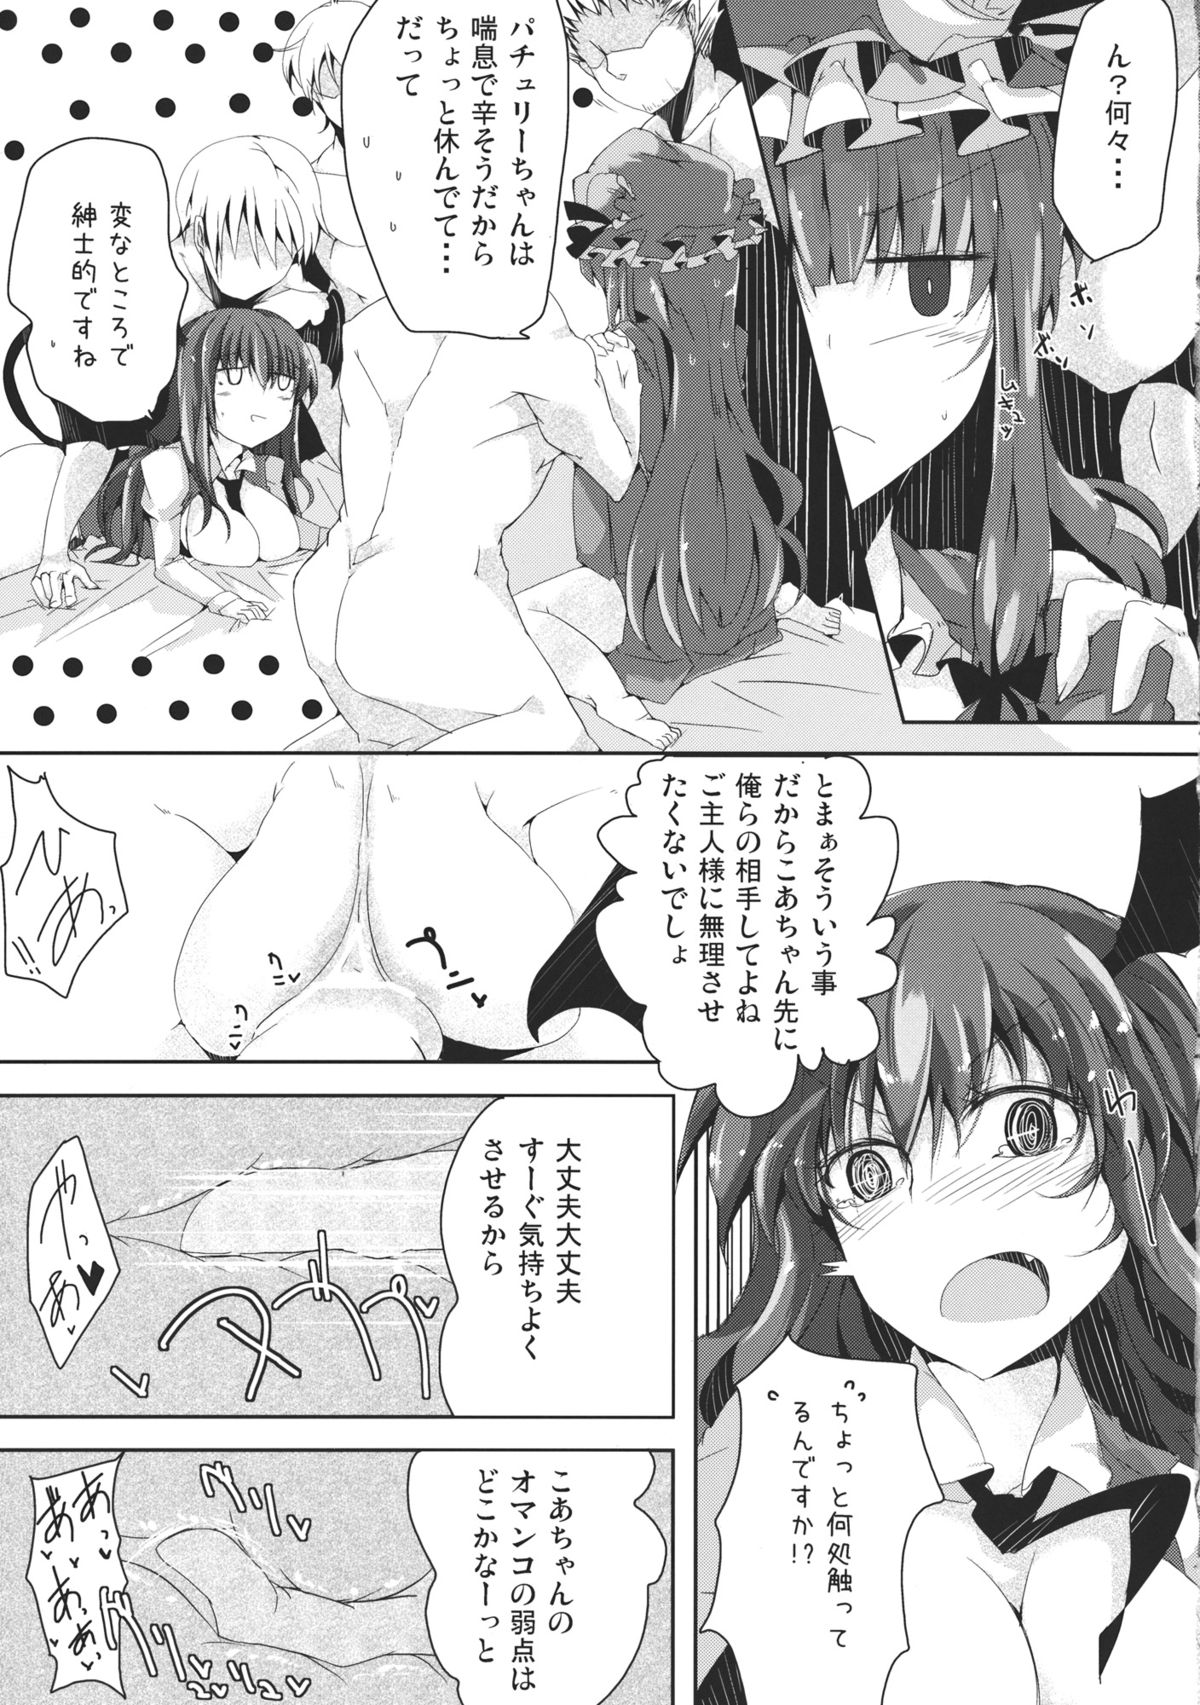 (Reitaisai 9) [662KB (Juuji)] Slovenly With (Touhou Project) page 9 full